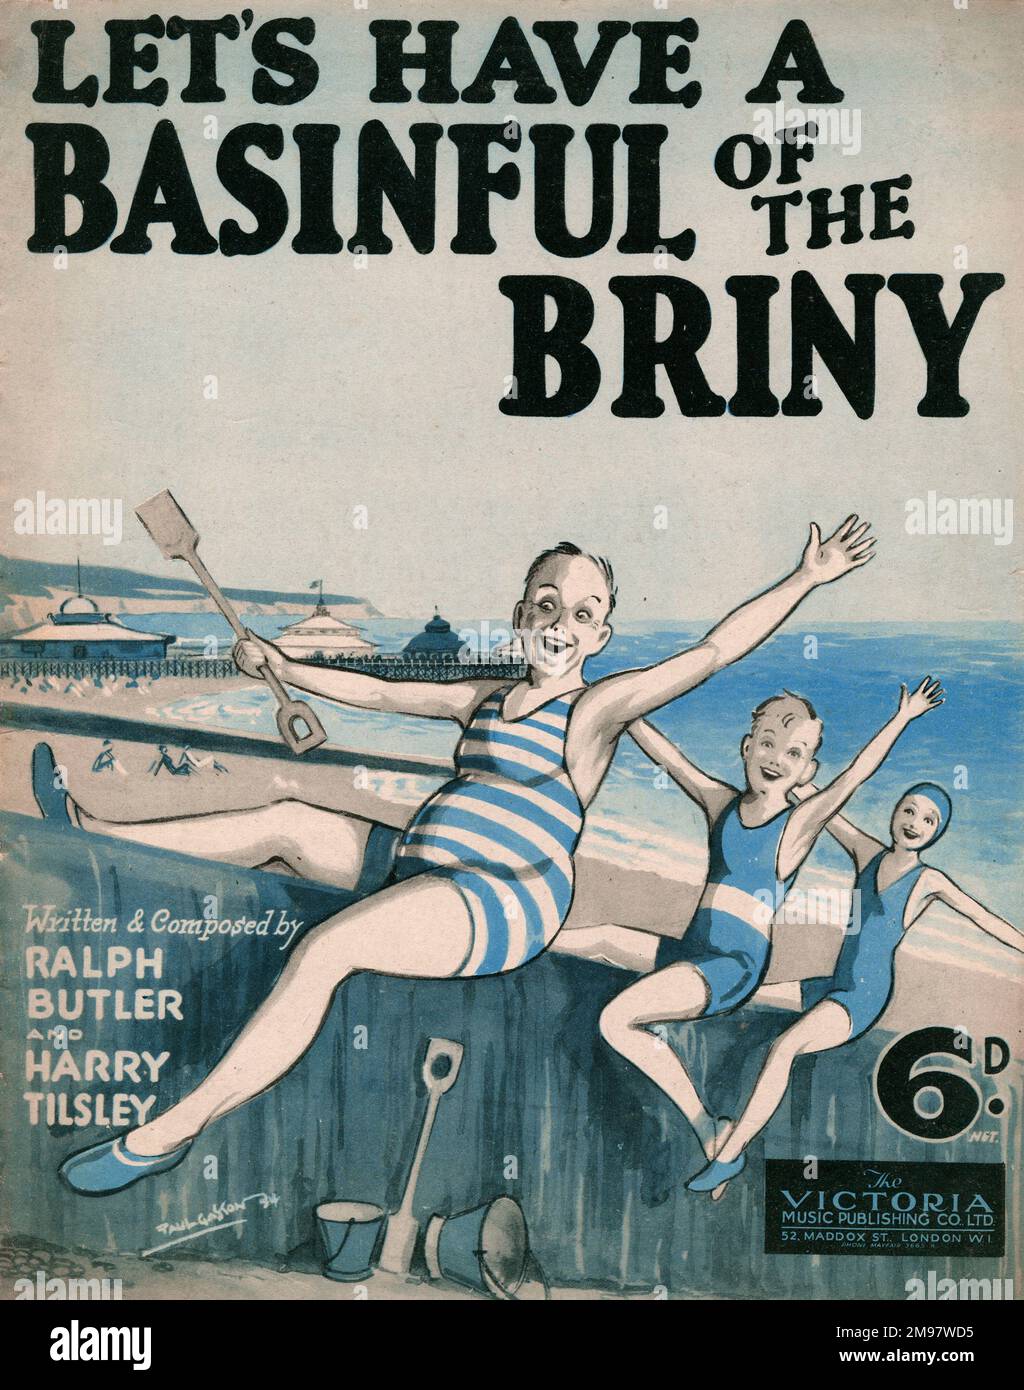 Music cover, Let's Have A Basinful of the Briny, song by Ralph Butler and Harry Tilsley. Showing a family of three having fun on the beach. Stock Photo